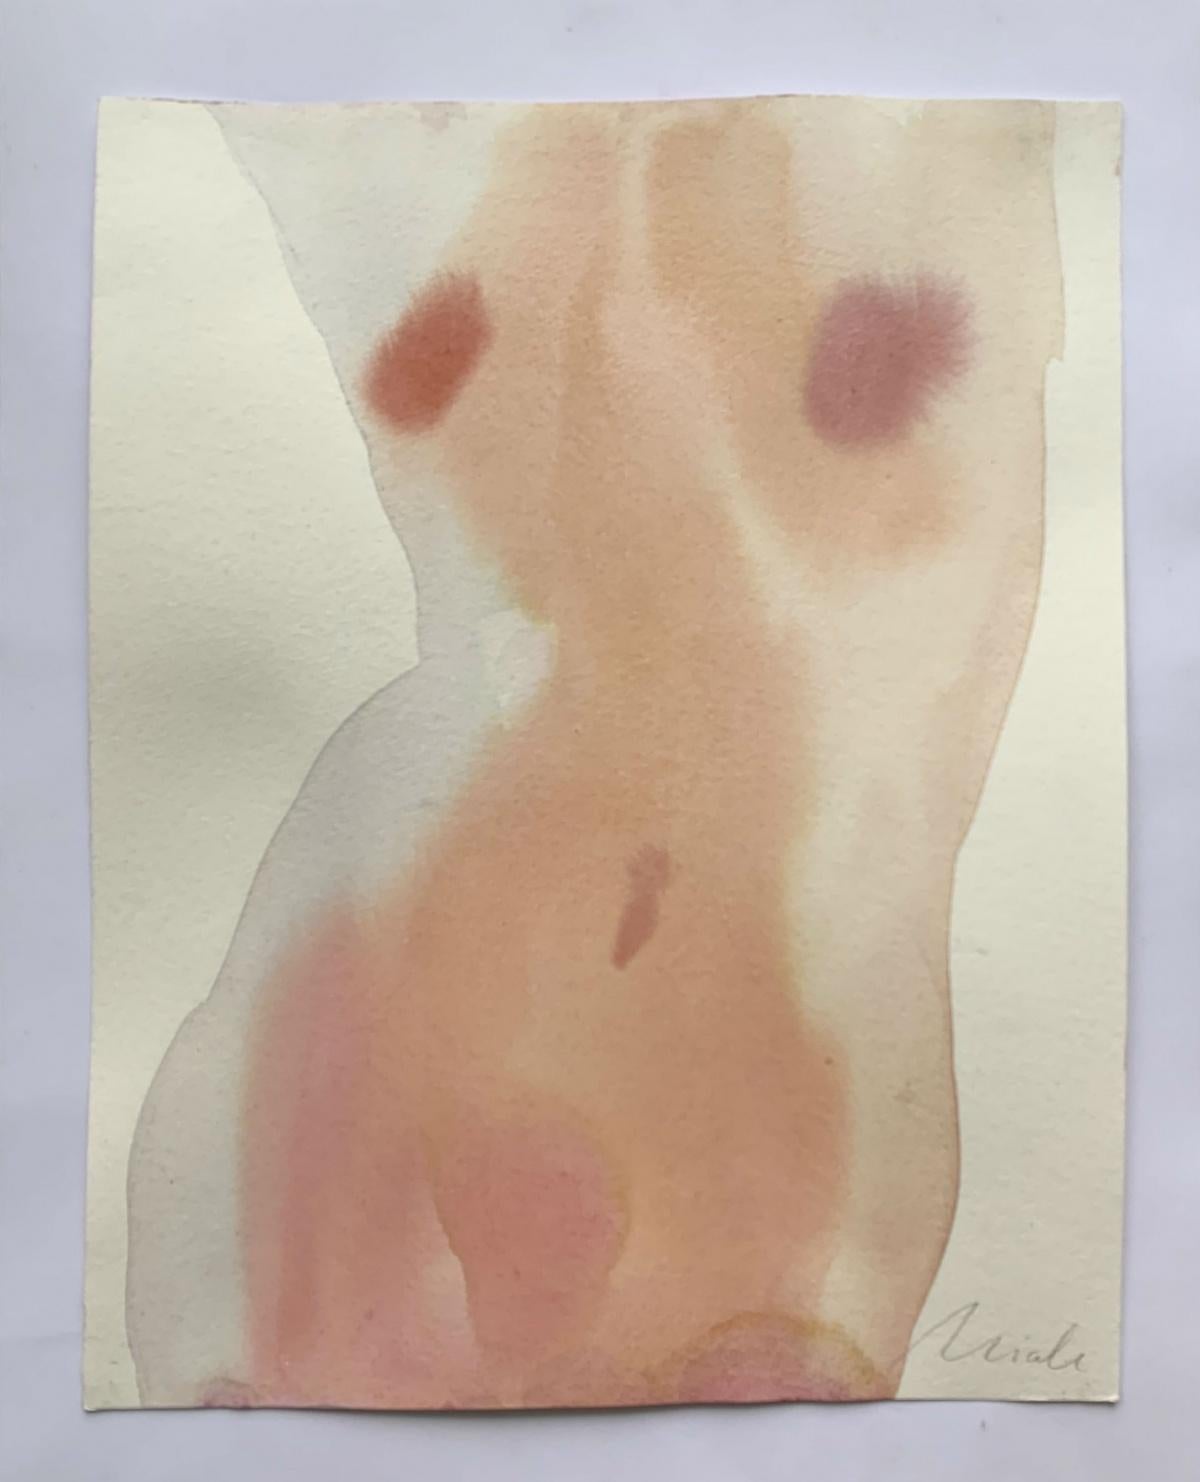 Nude - XXI Century, Watercolor Figurative Painting, Female Nude, Vertical - Other Art Style Art by Maria Iciak